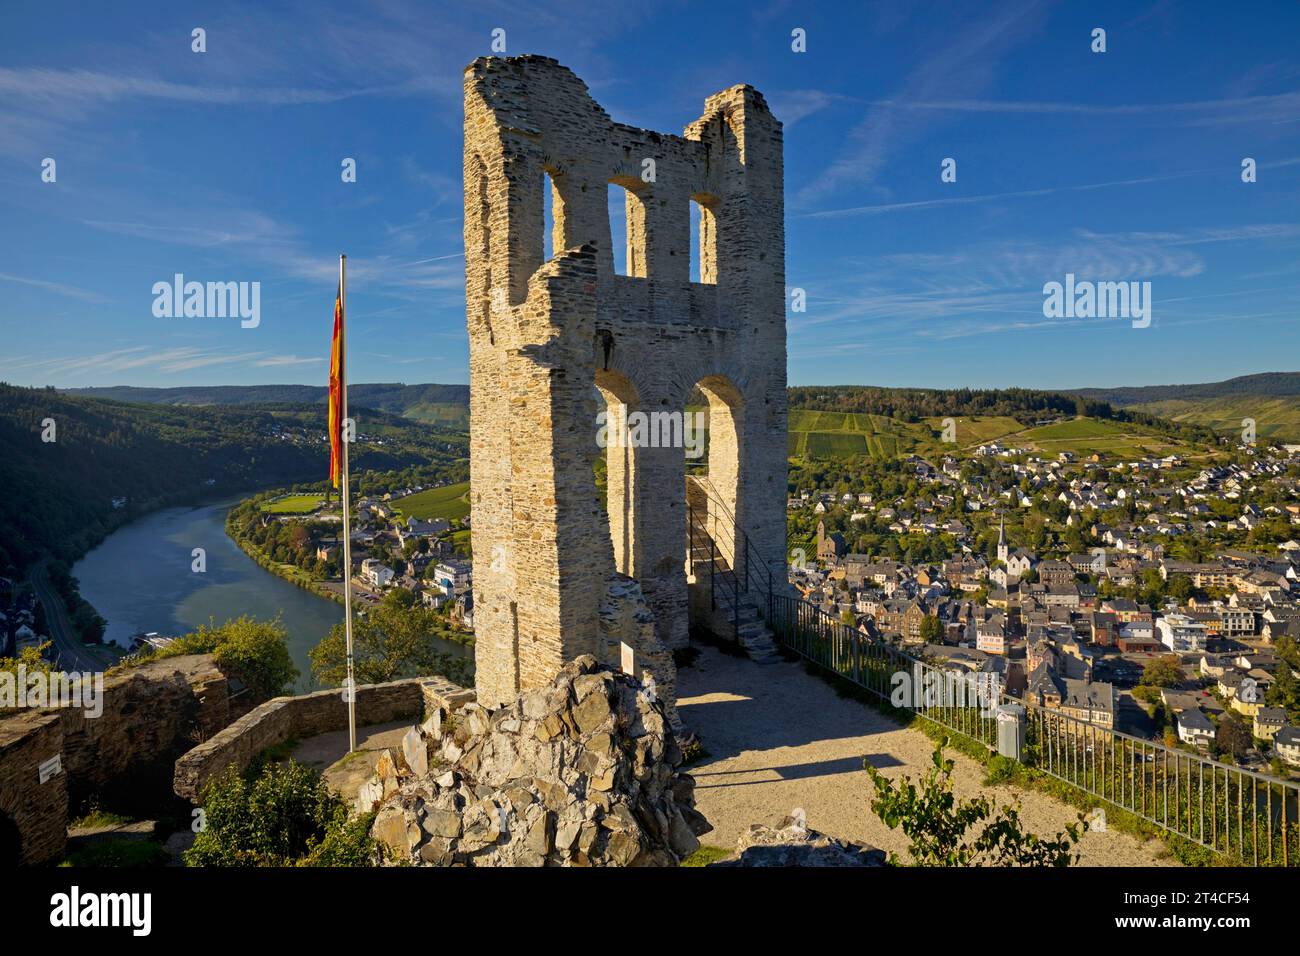 Grevenburg castle ruin with a view of the Moselle, Germany, Rhineland-Palatinate, Traben-Trarbach Stock Photo